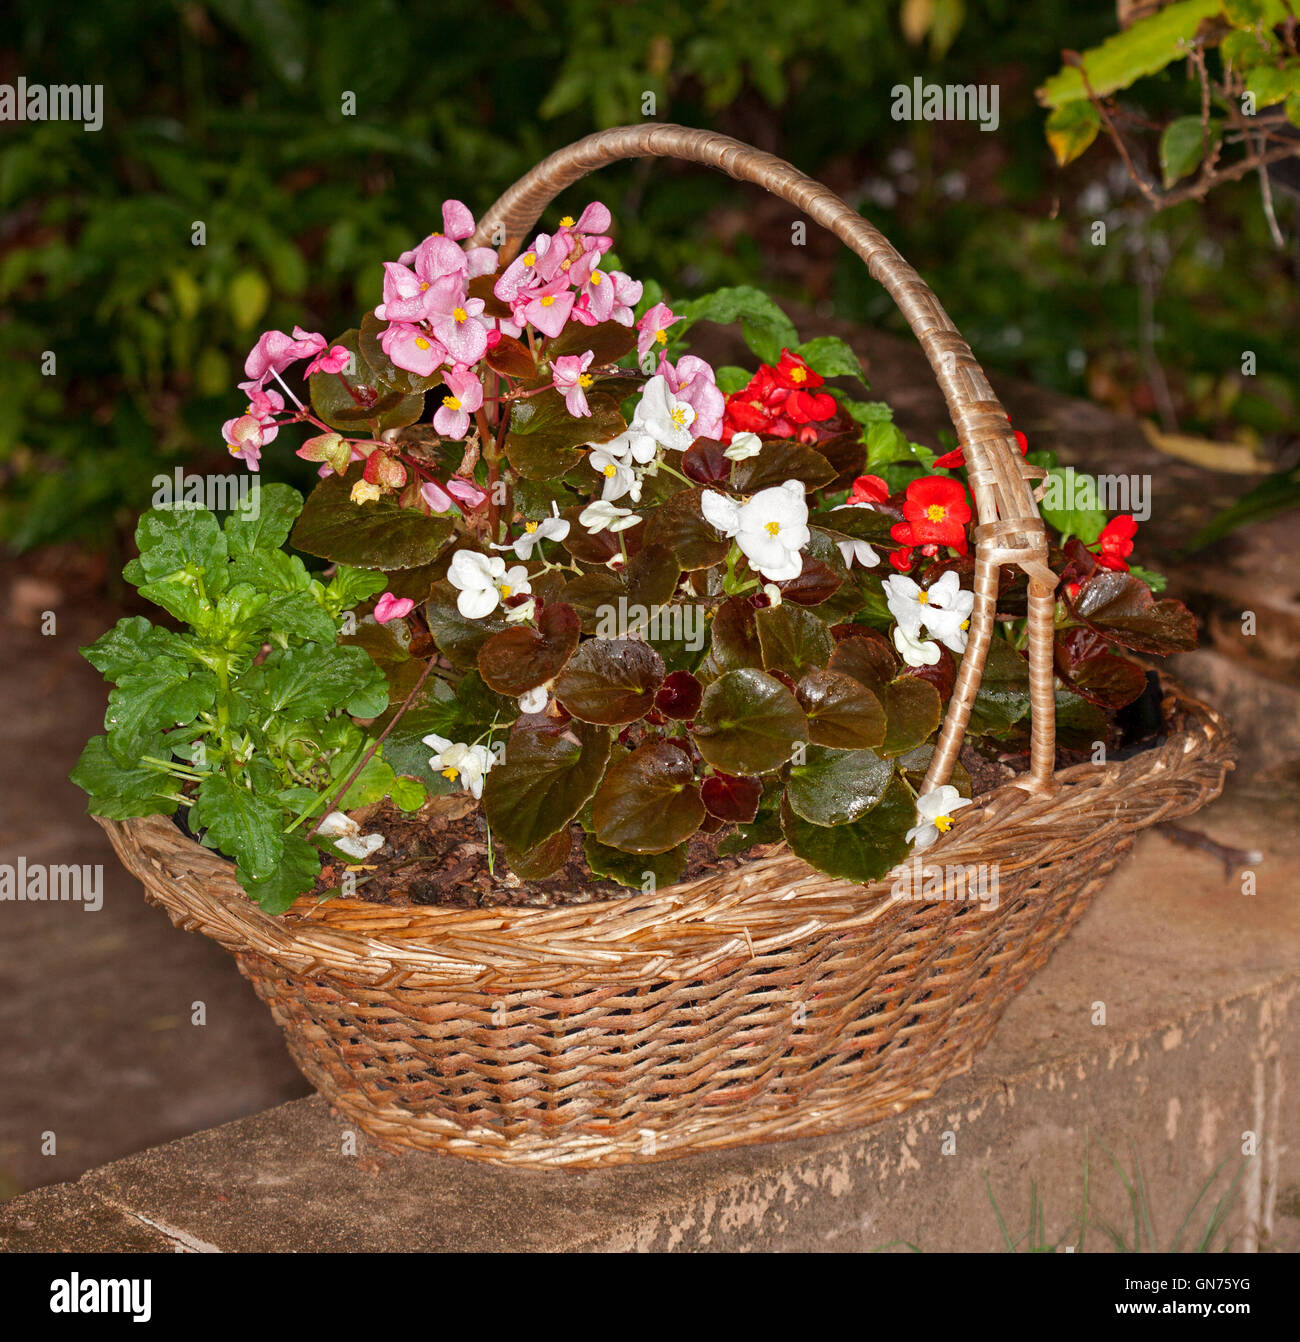 Cluster of bedding begonias with vivid pink, red & white flowers & red & green leaves growing in large decorative container - recycled wicker basket Stock Photo